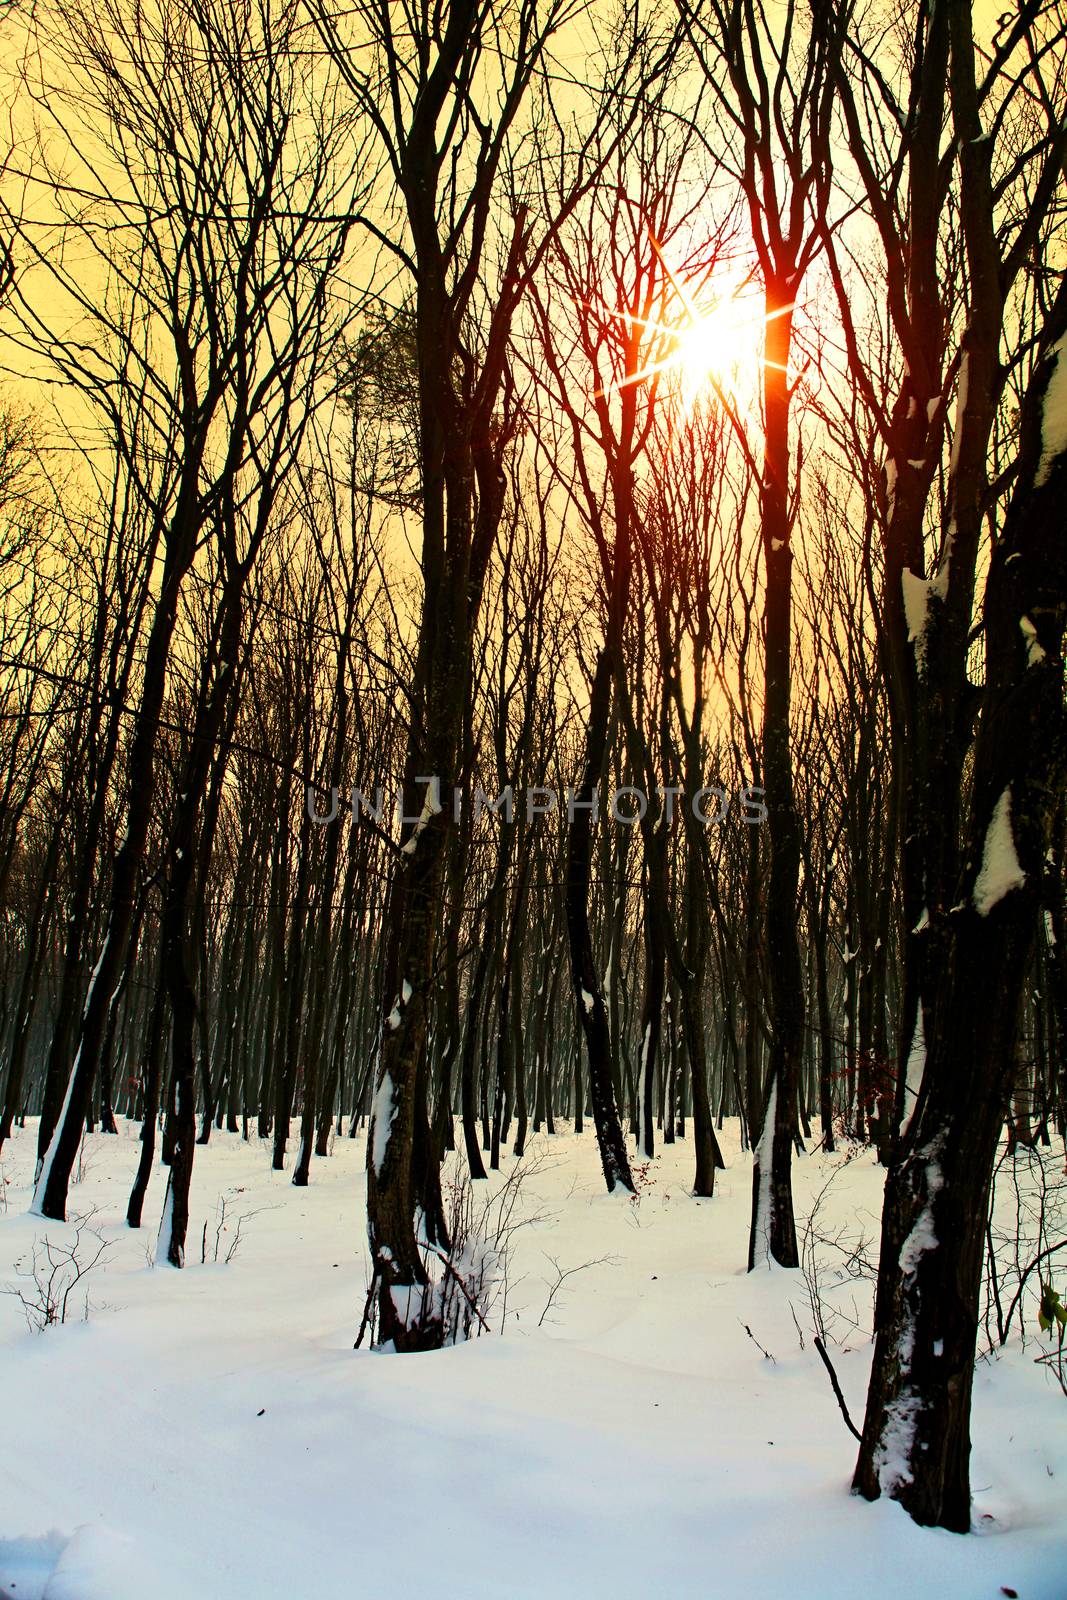 Sunset in forest between trees at winter period